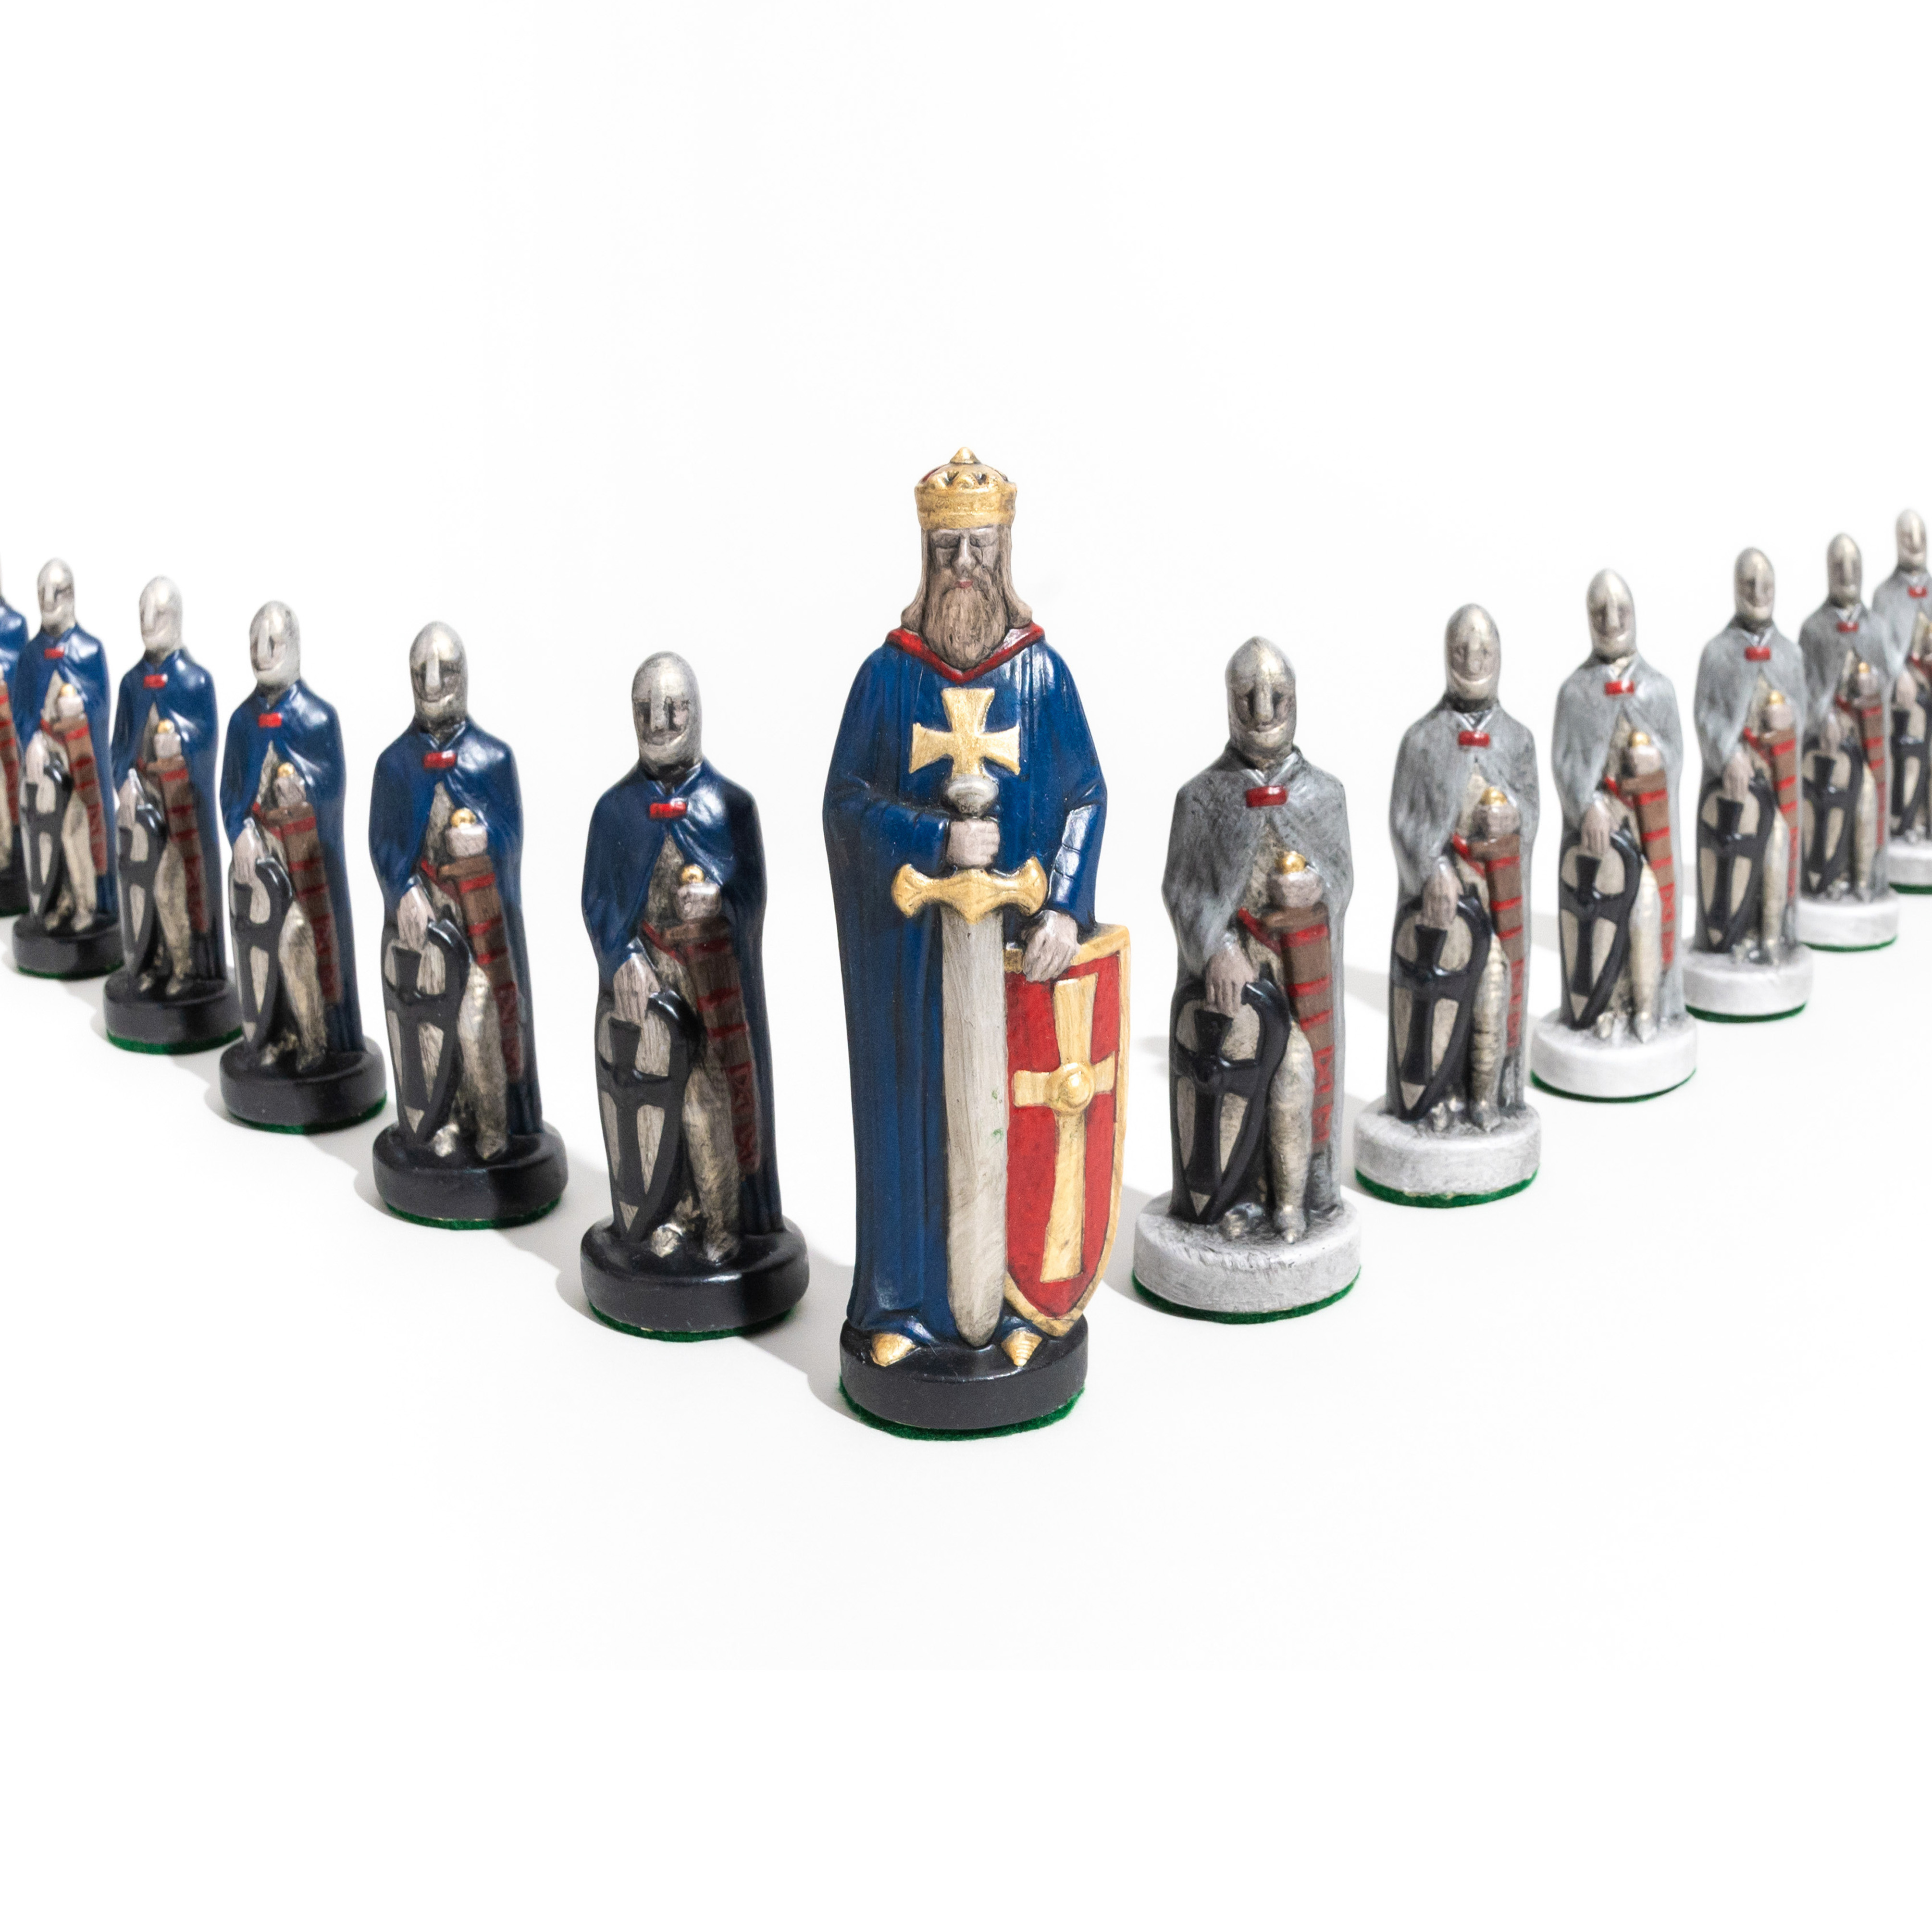 Hand-crafted Medieval Chess Set and Chess Board